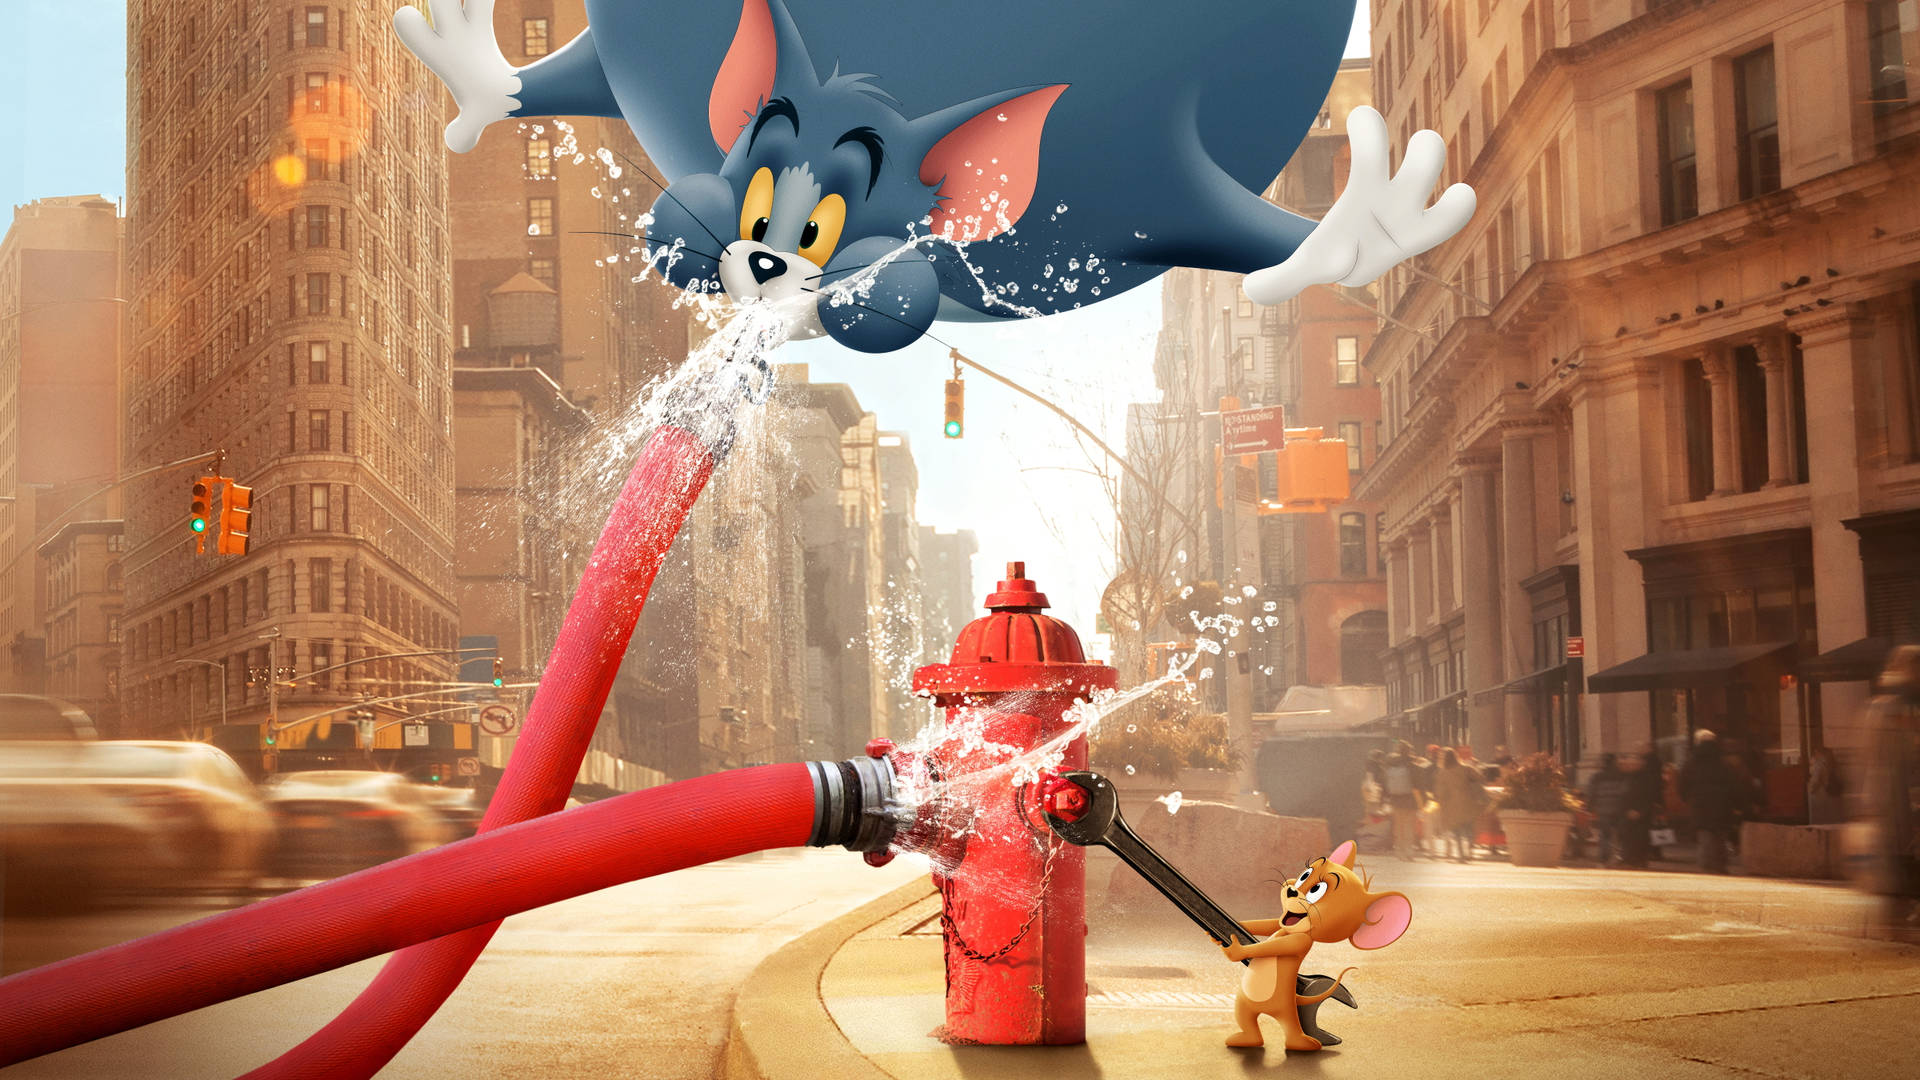 Fire Hydrant Fight Of Tom And Jerry Aesthetic Wallpaper